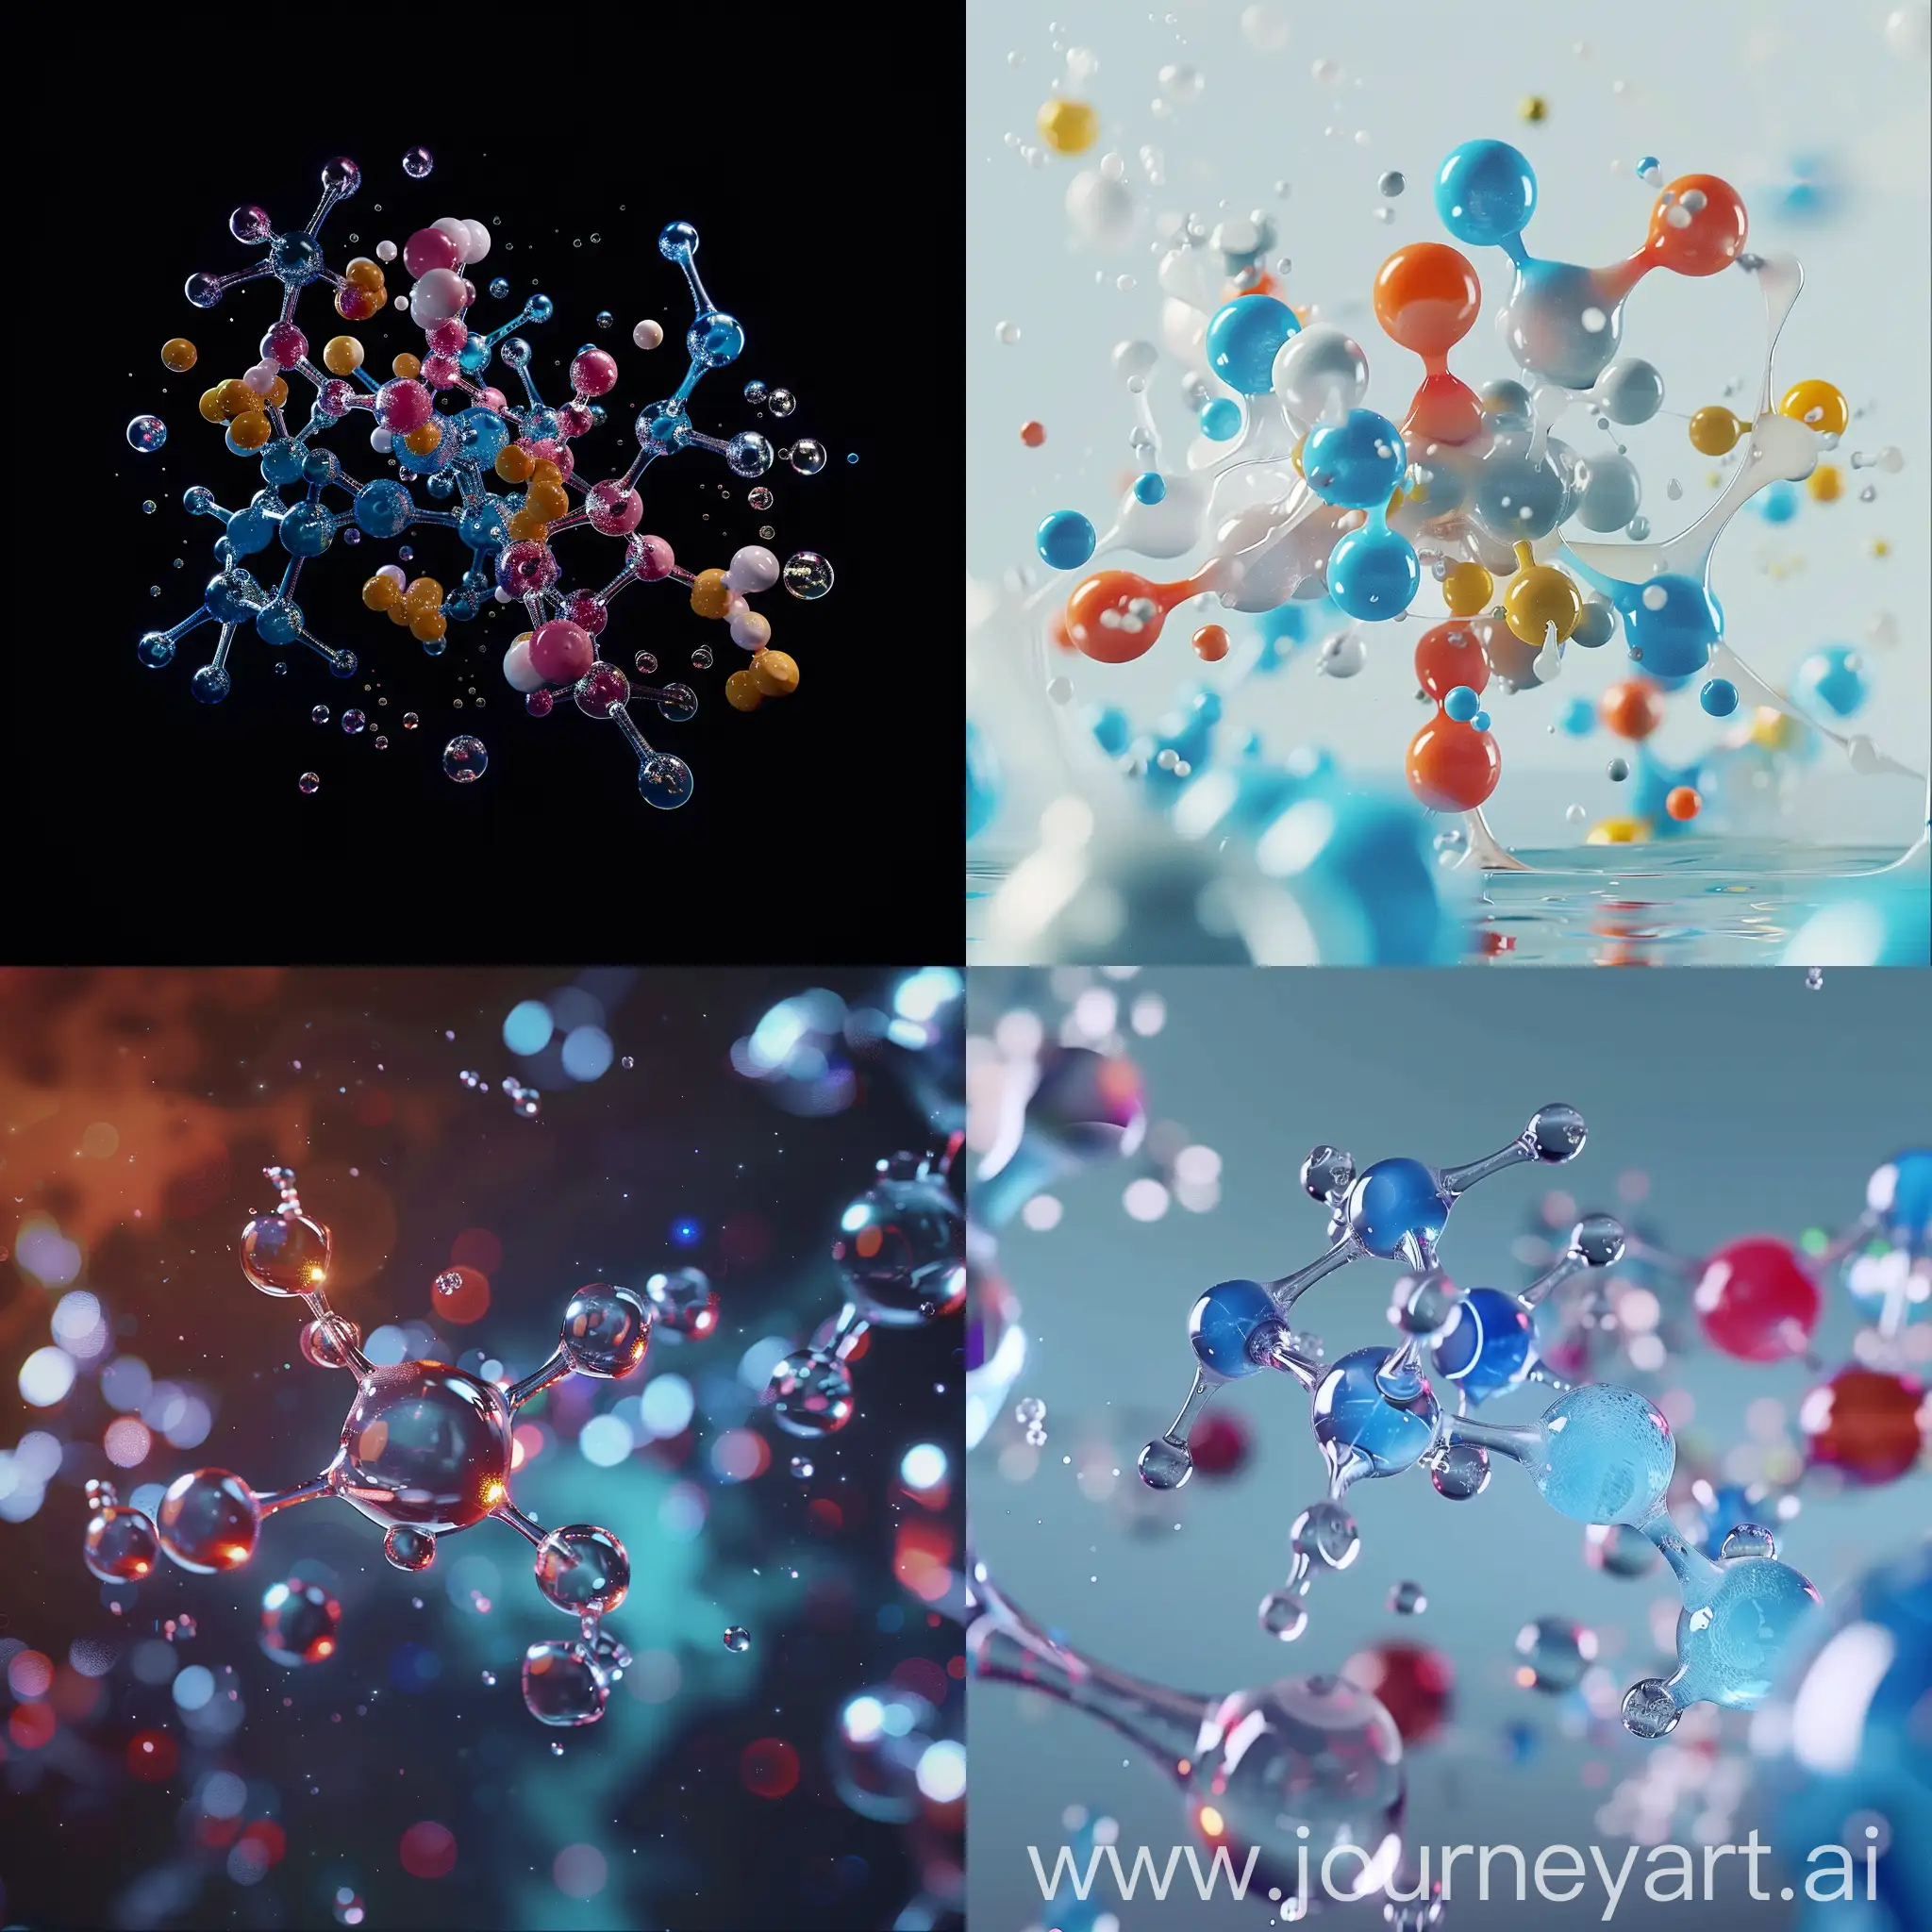 Colorful-Animated-4K-Water-Molecule-Illustration